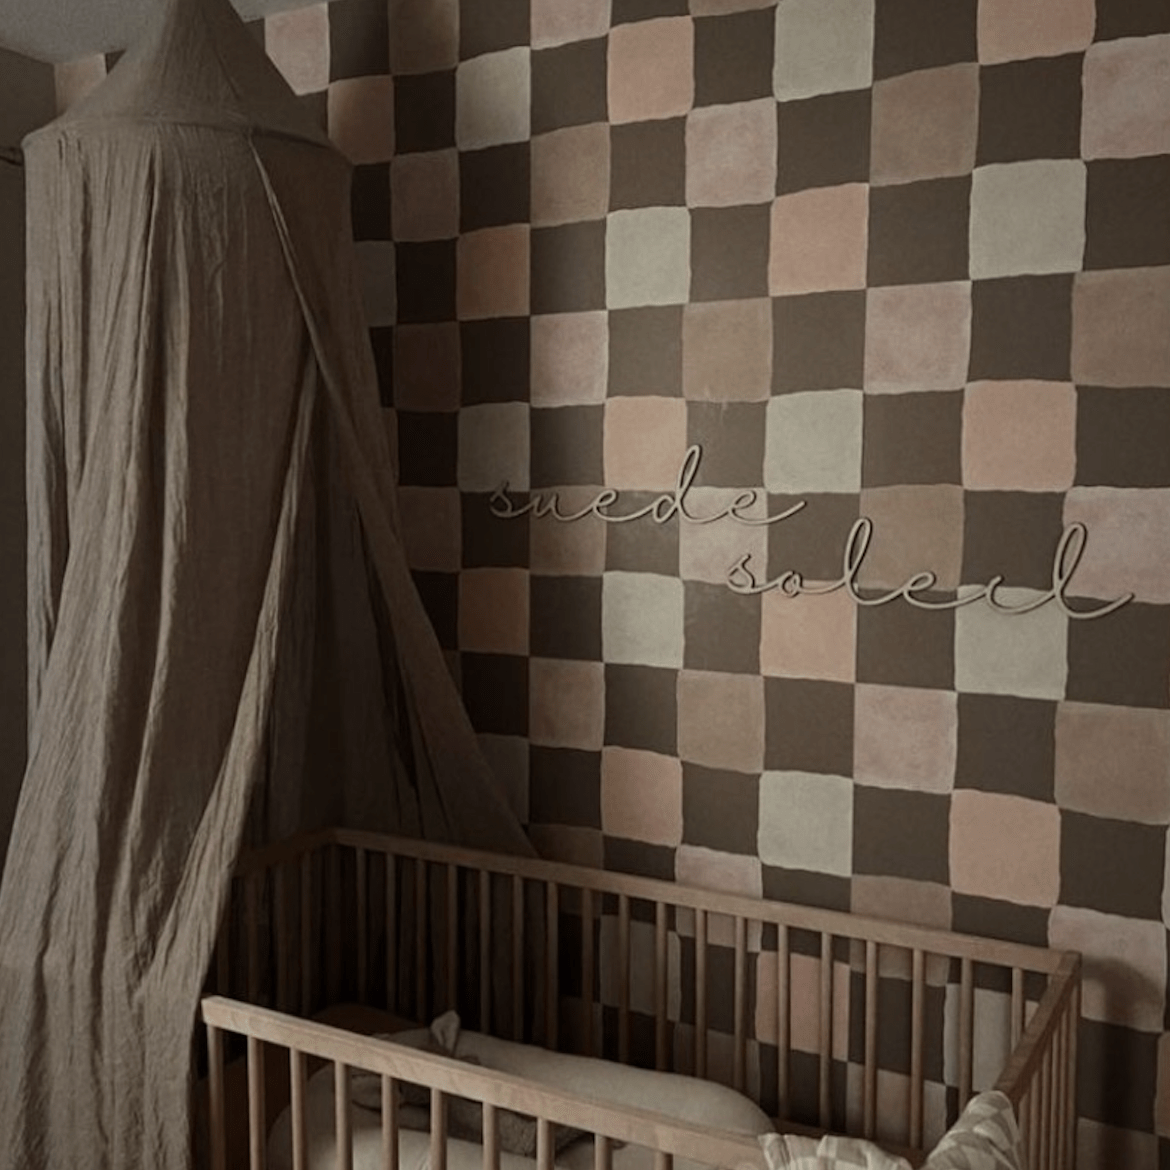 Stylish boho baby nursery featuring a checkered wallpaper in brown and blush pink tones, with a wooden crib, soft bedding, and a canopy, creating a cozy and elegant space